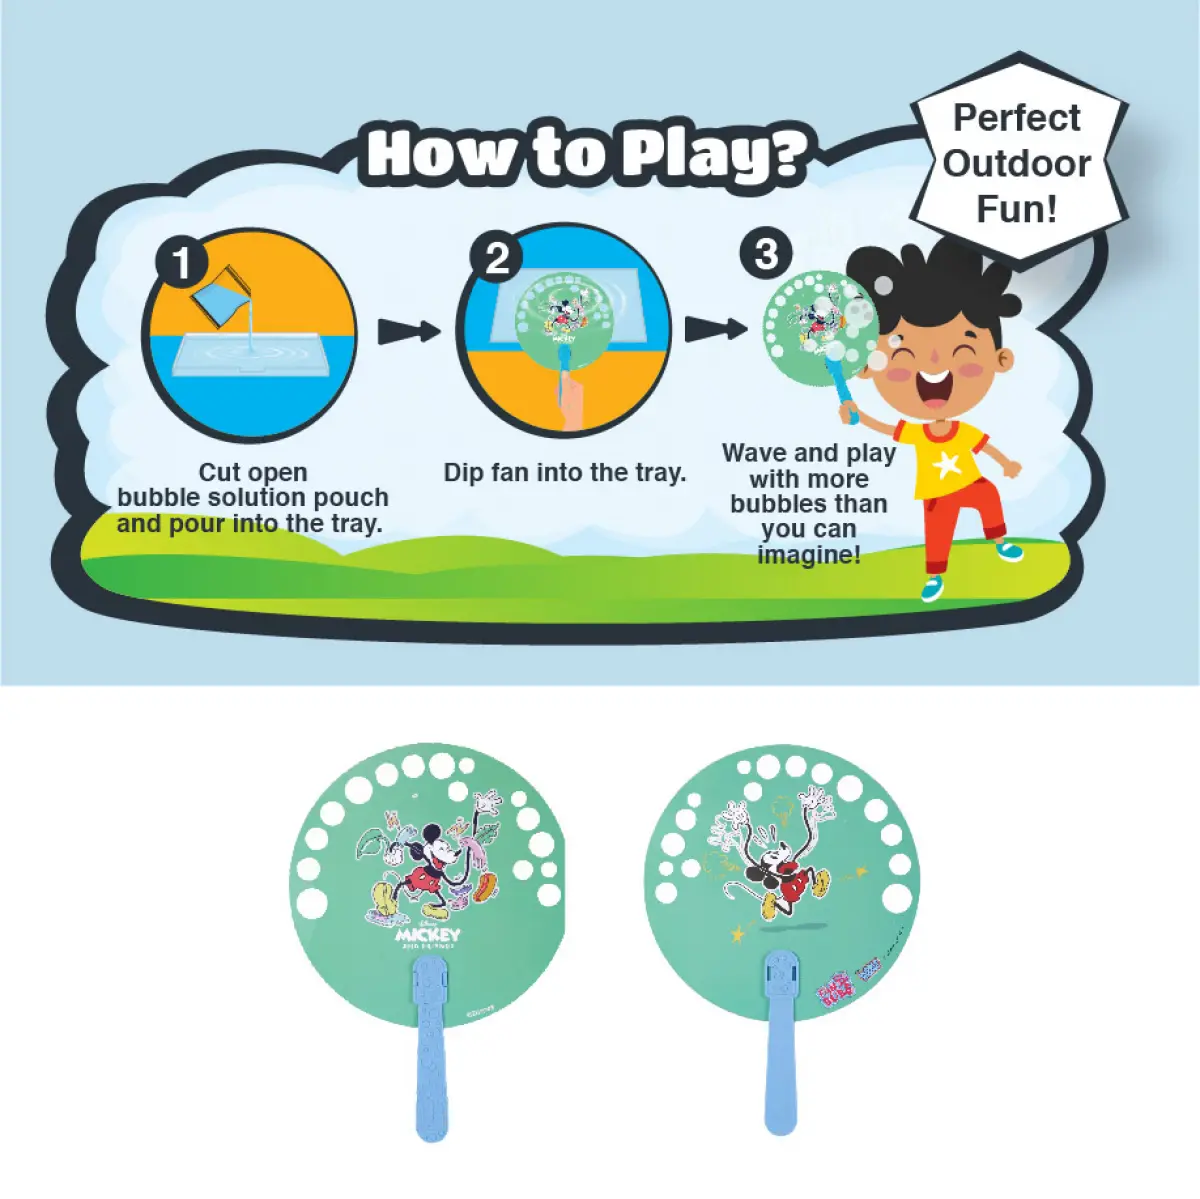 Bubble Magic Fan Bubs Mickey Mouse Theme Bubble Solution For Kids of Age 3Y+, Multicolour